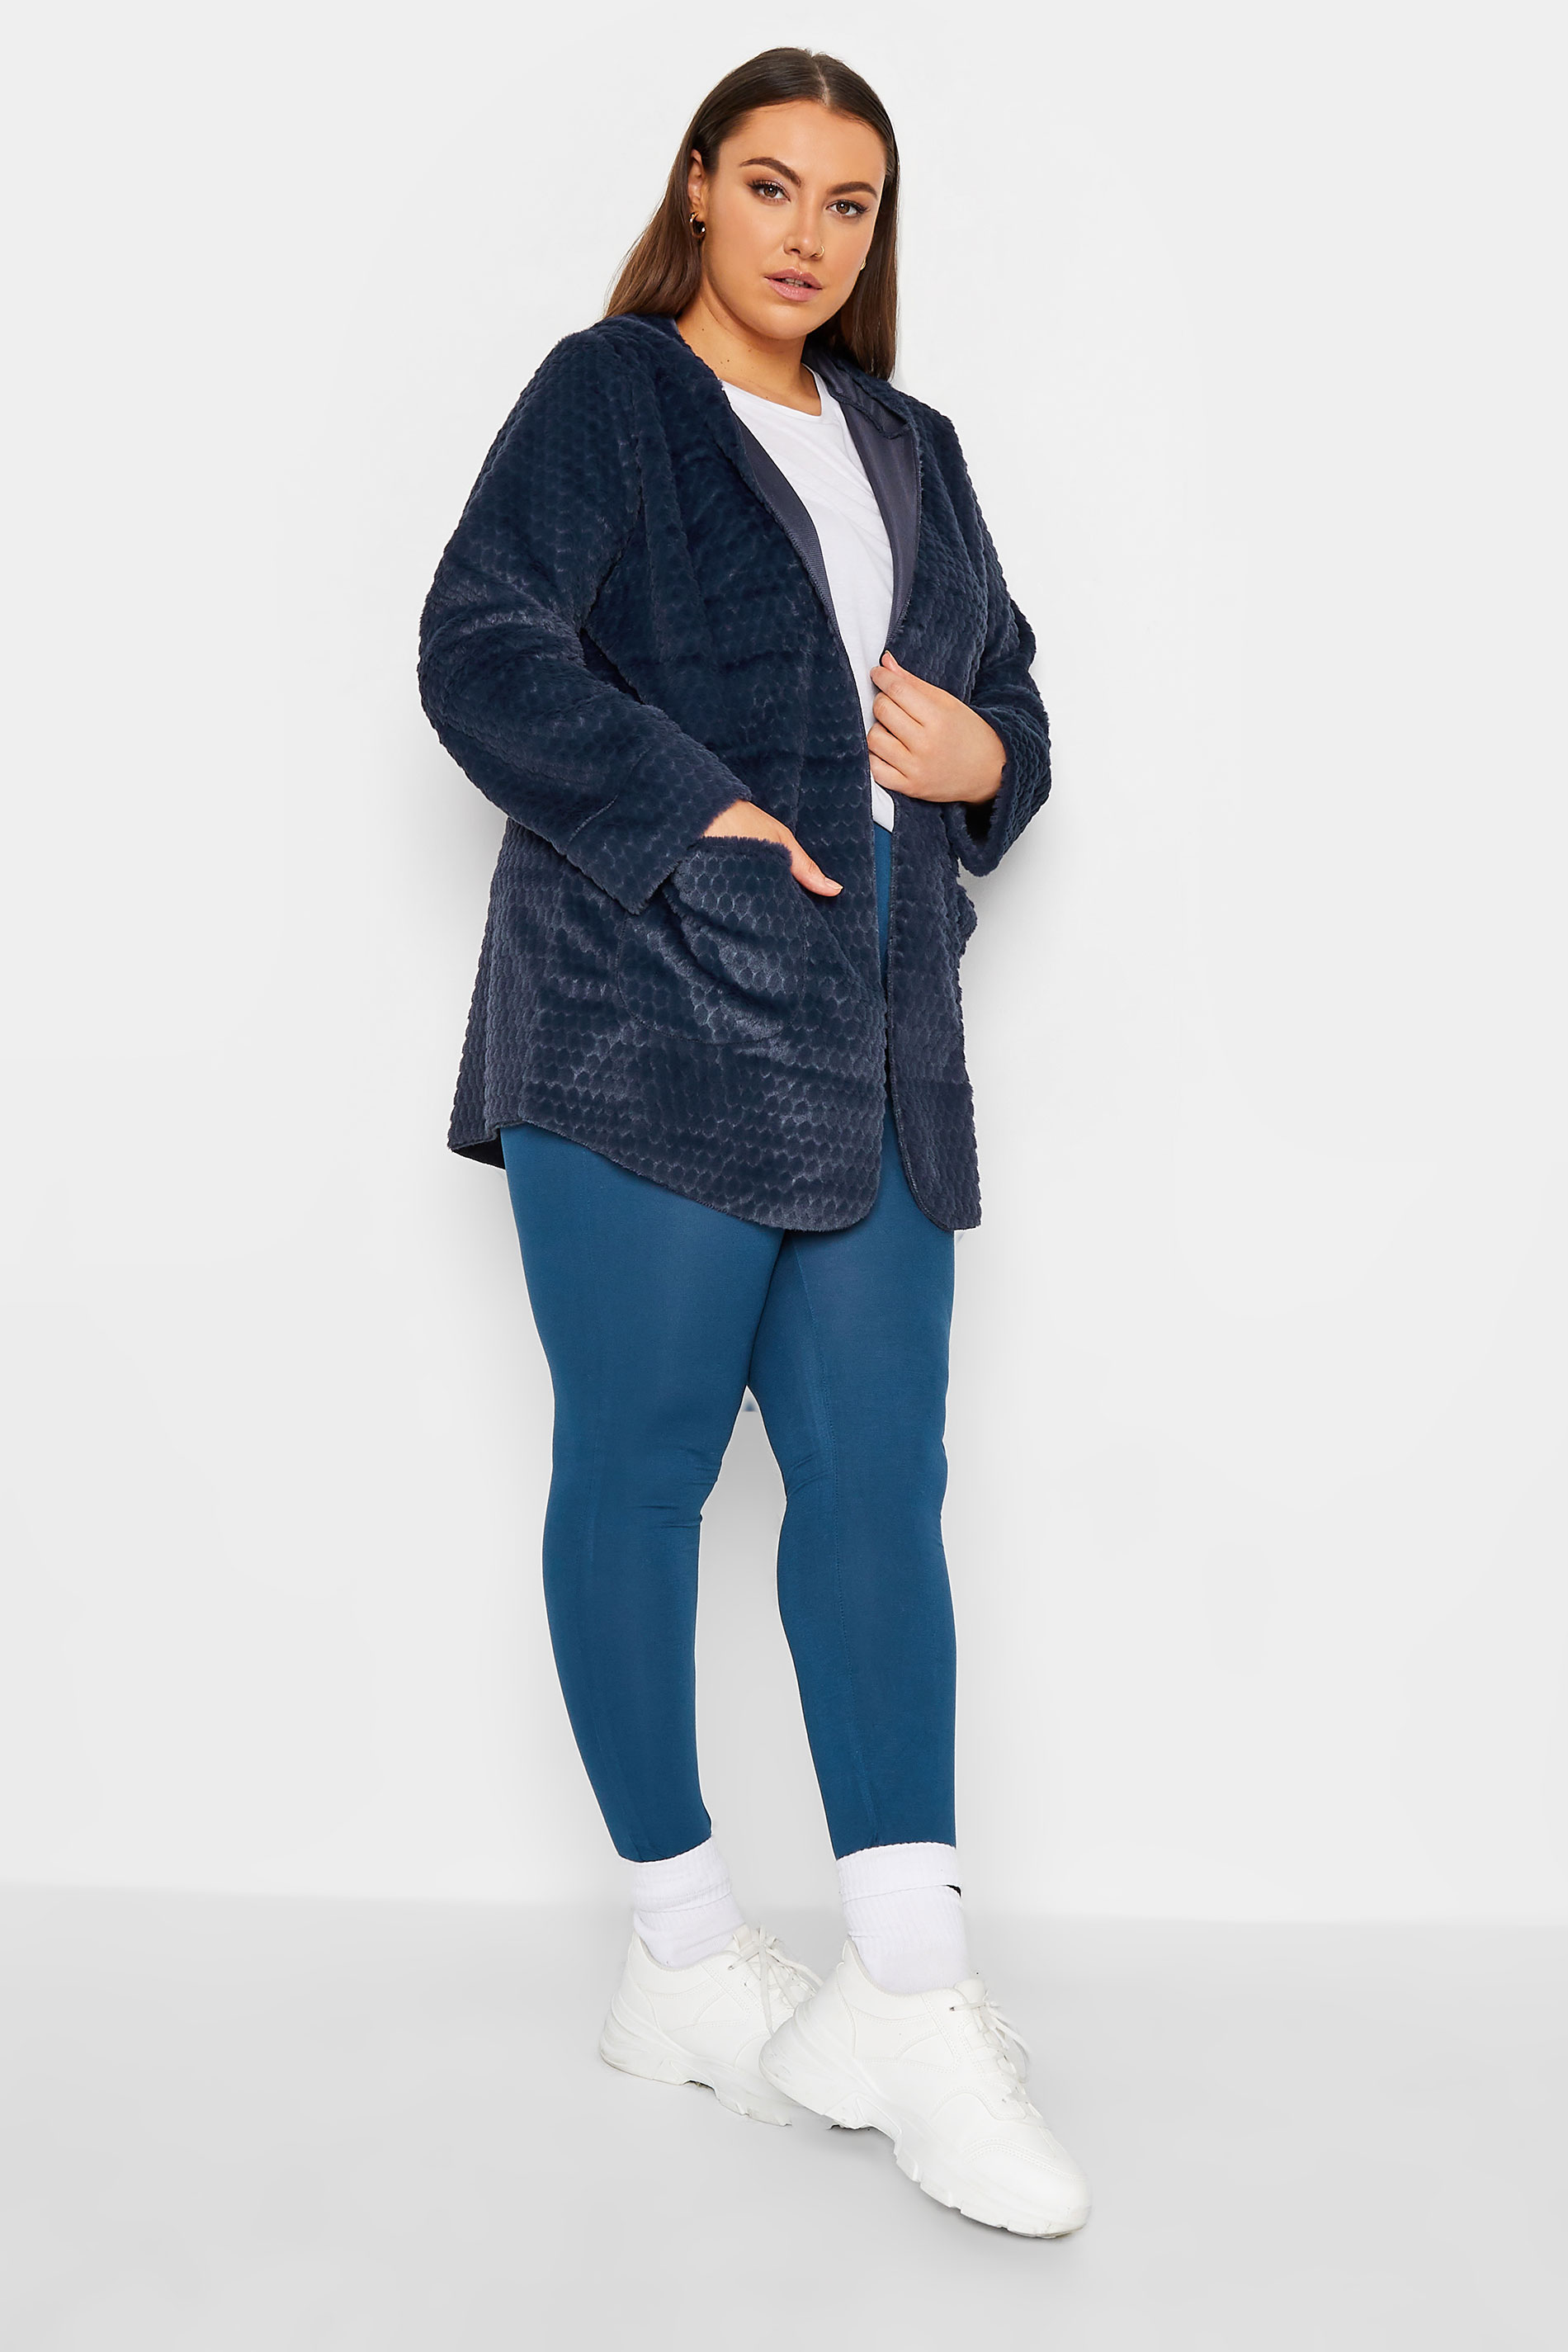 YOURS LUXURY Plus Size Navy Blue Faux Fur Hooded Jacket | Yours Clothing 2